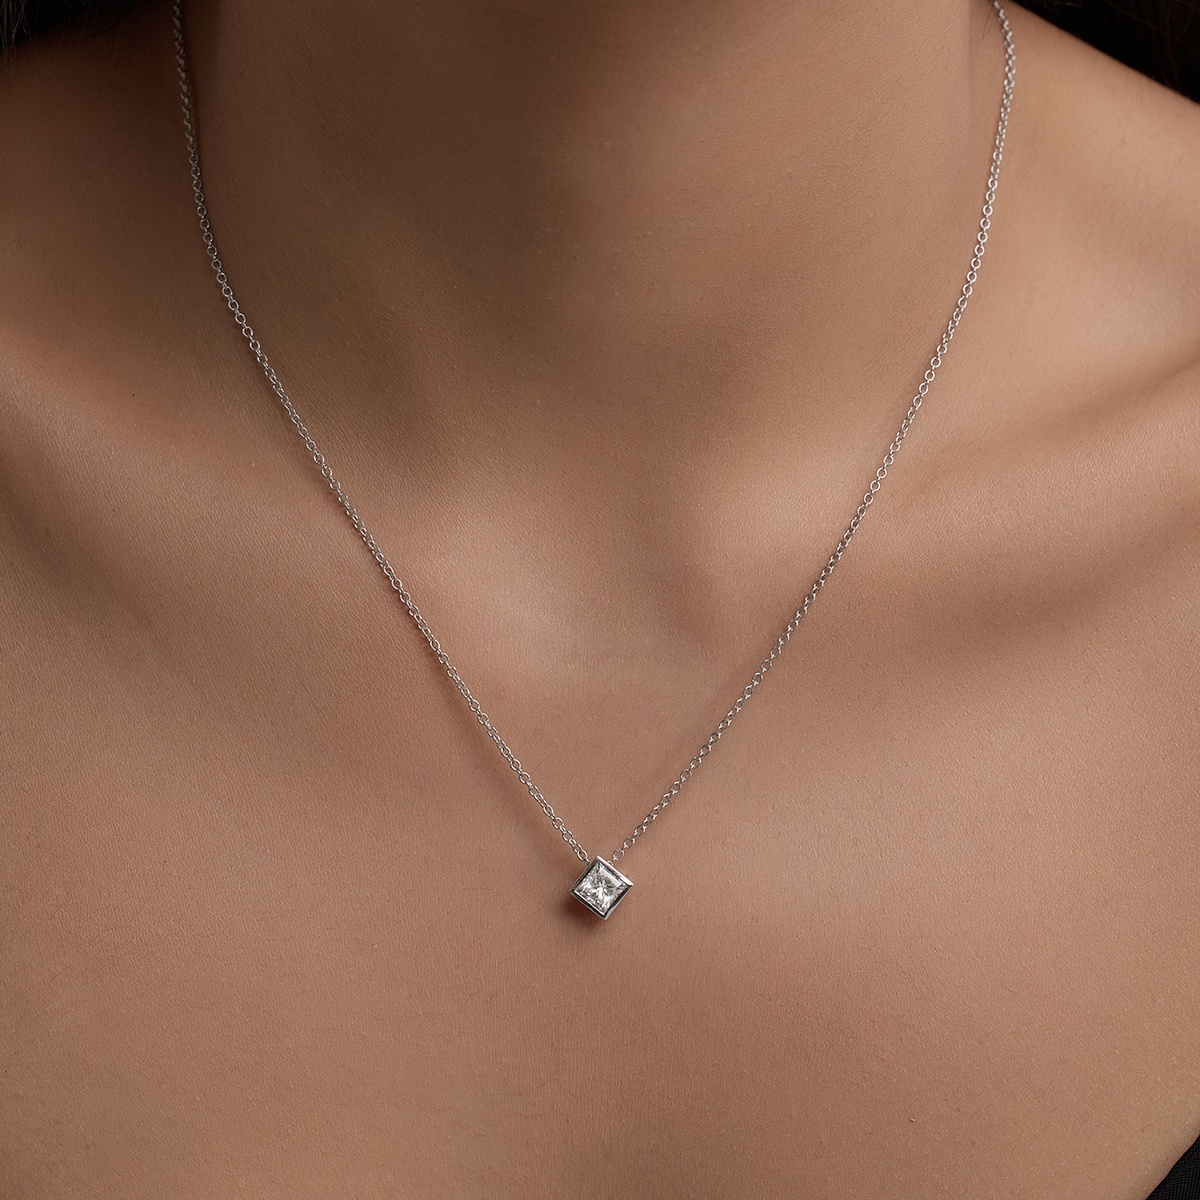 Additional Image 3 for  1 ctw Princess Lab Grown Diamond Bezel Set Solitaire Pendant with Adjustable Chain